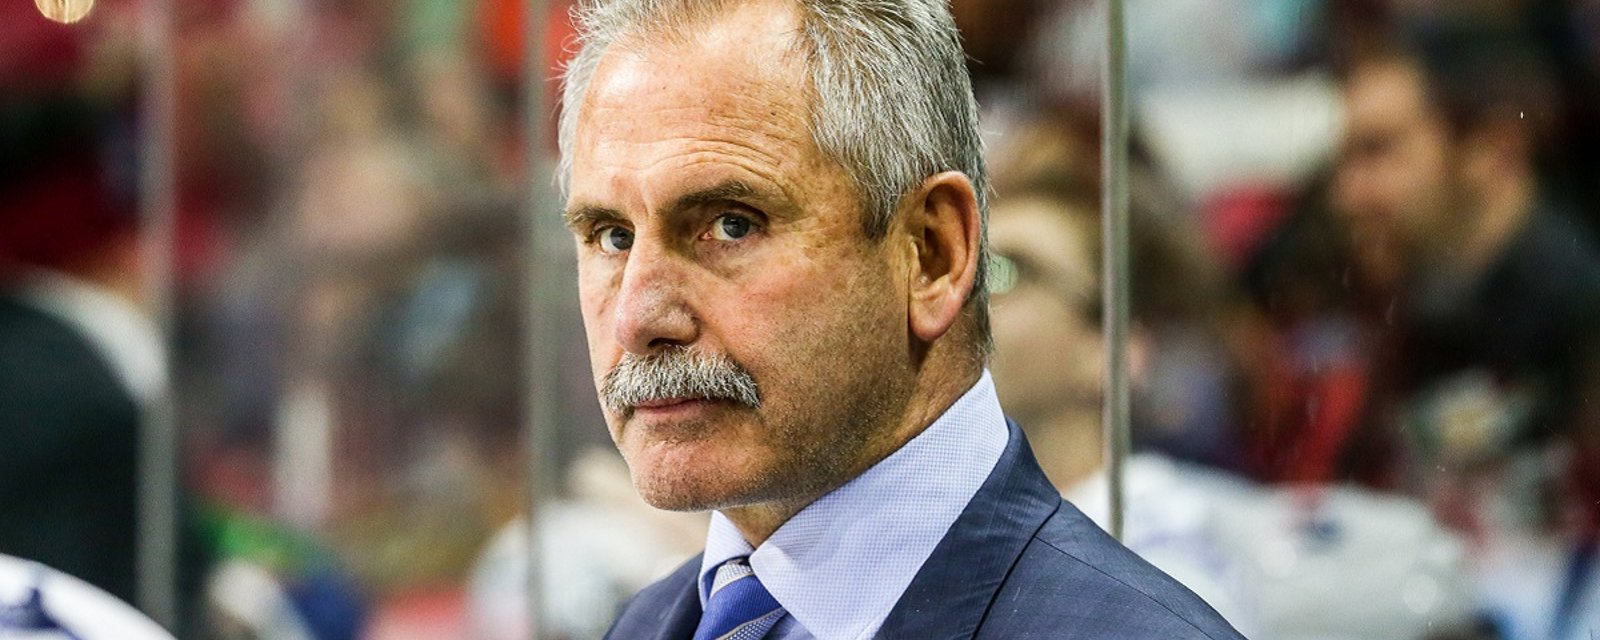 Rumors and oddsmakers point to NHL coach losing his job.